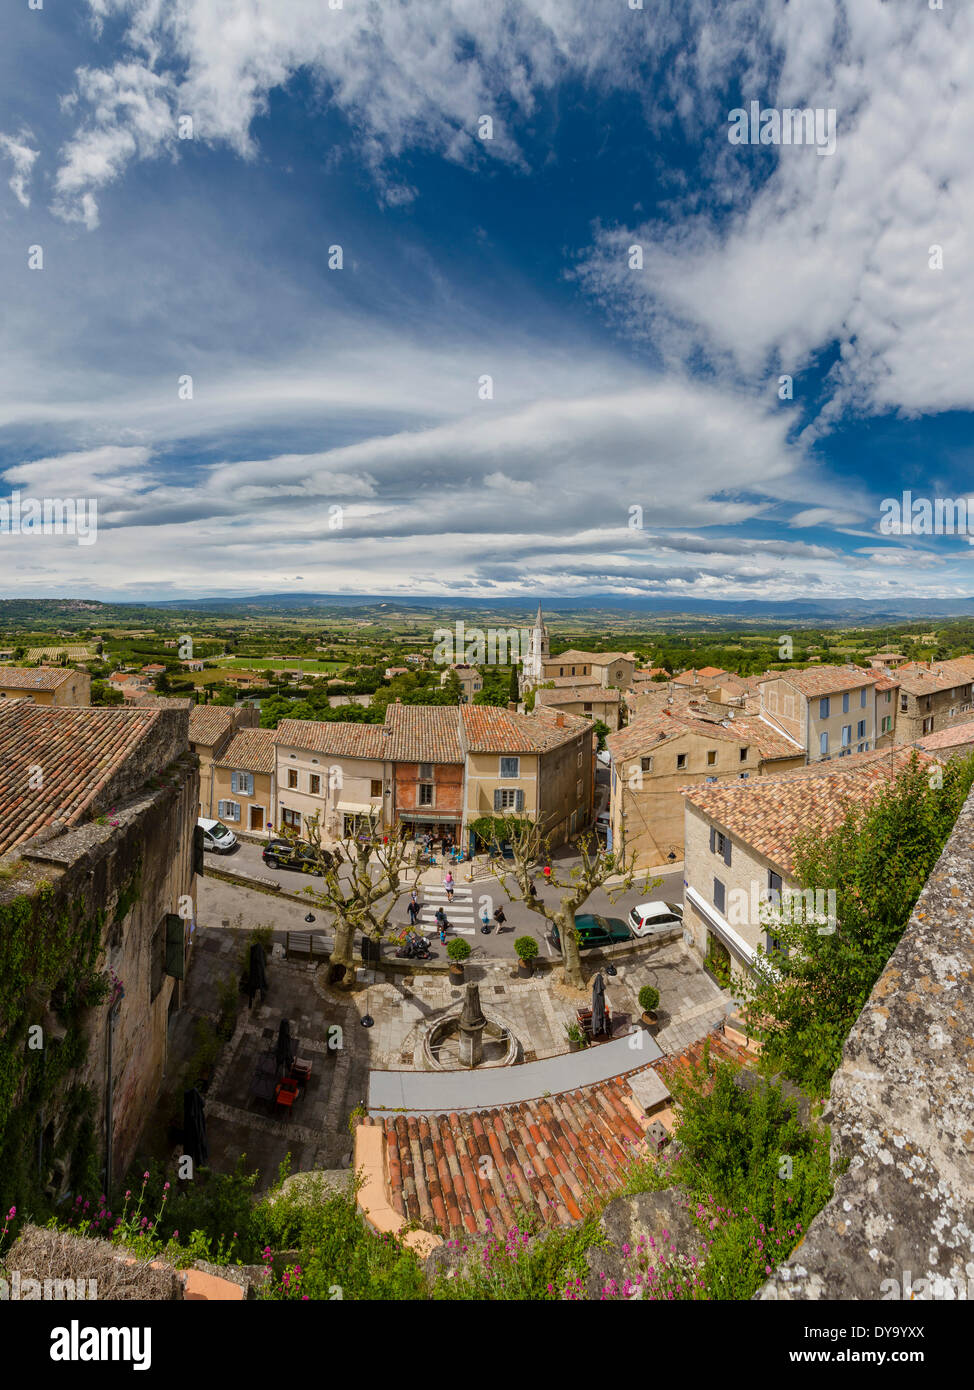 View, roofs, town, village, spring, mountains, hills, Bonnieux, Vaucluse, France, Europe, Stock Photo